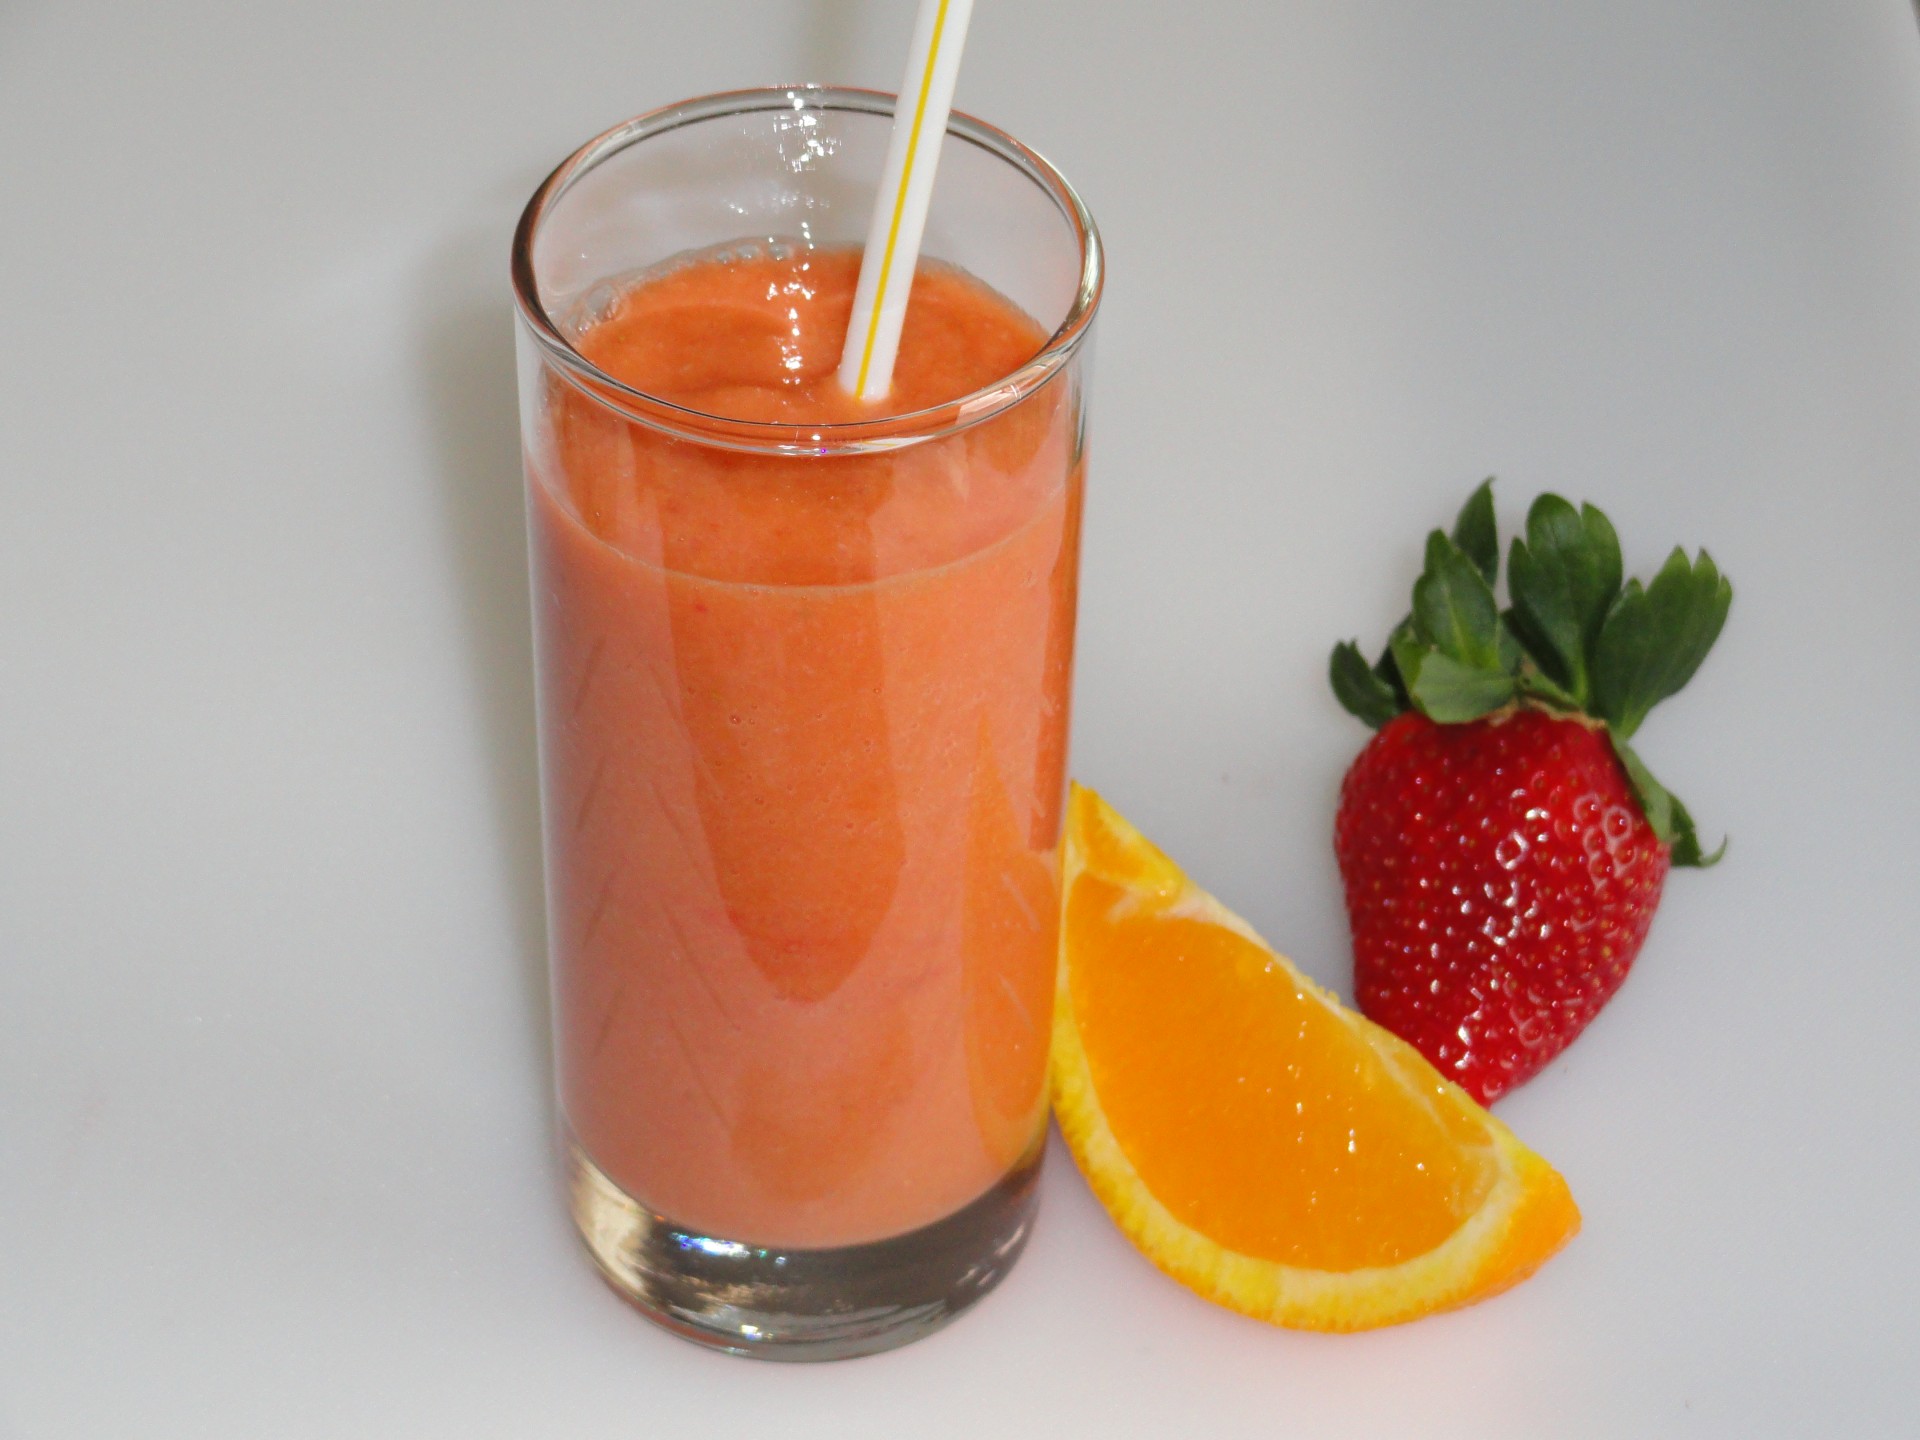 Tropical fruit smoothie